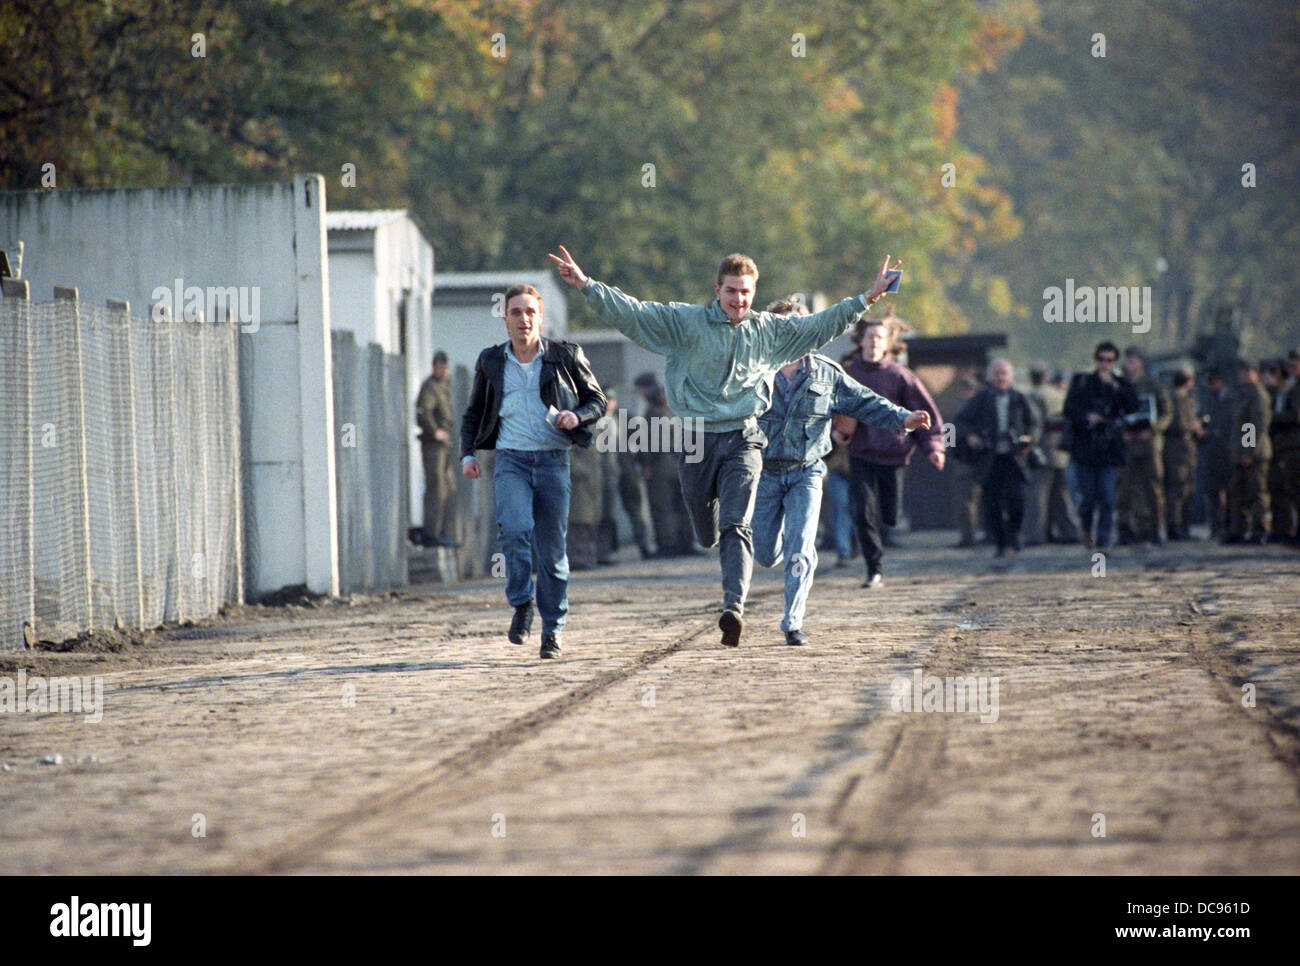 Young men run cheering through a broder crossing station in Berlin, Germany, 10 Novermber 1989. Under the people's pressure the GDR opened its borders on November 9th 1989. After 28 years the Berlin Wall makes no more sense. Stock Photo